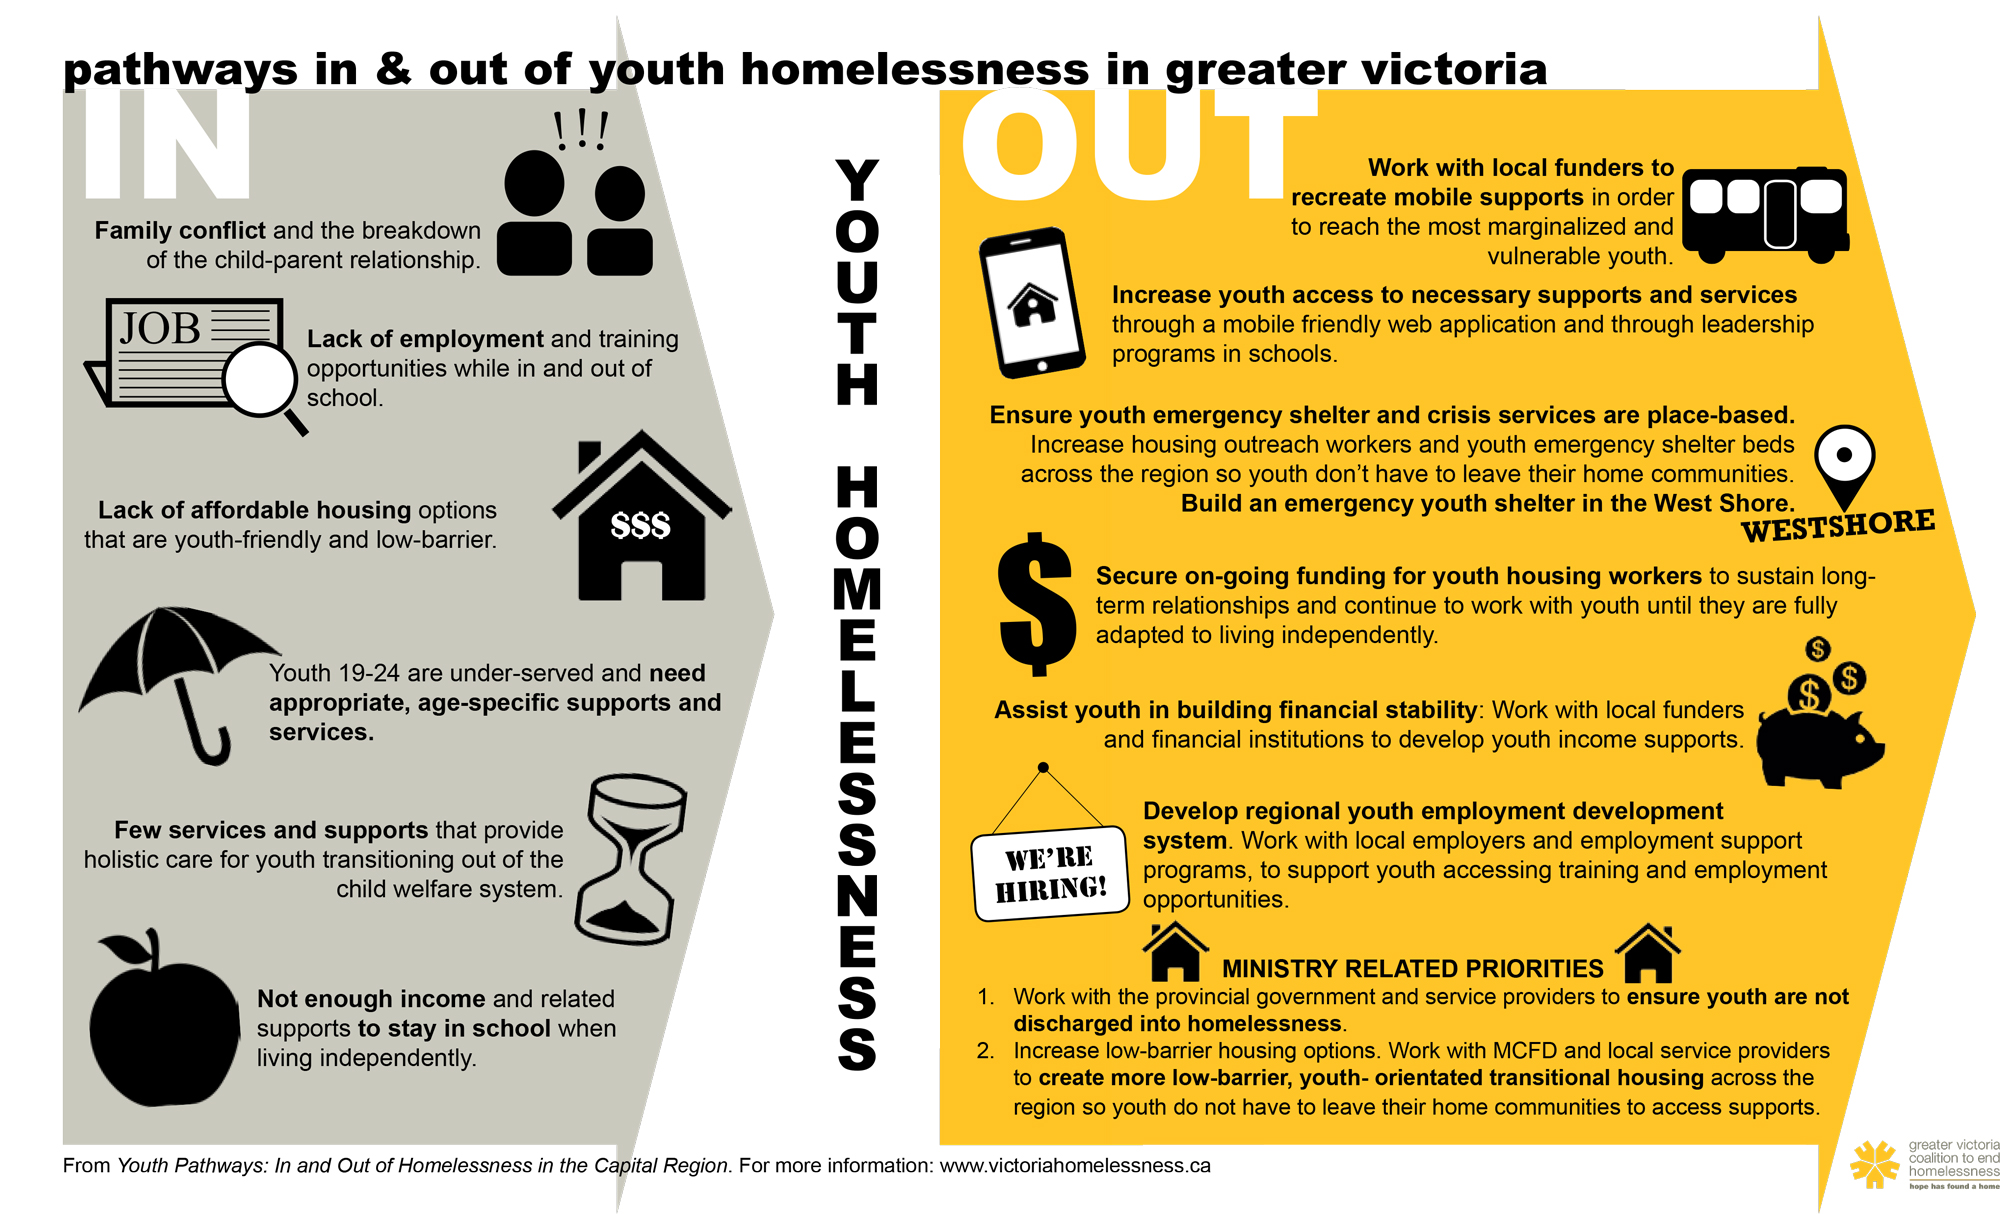 Pathways In & Out of Youth Homelessness in Greater Victoria